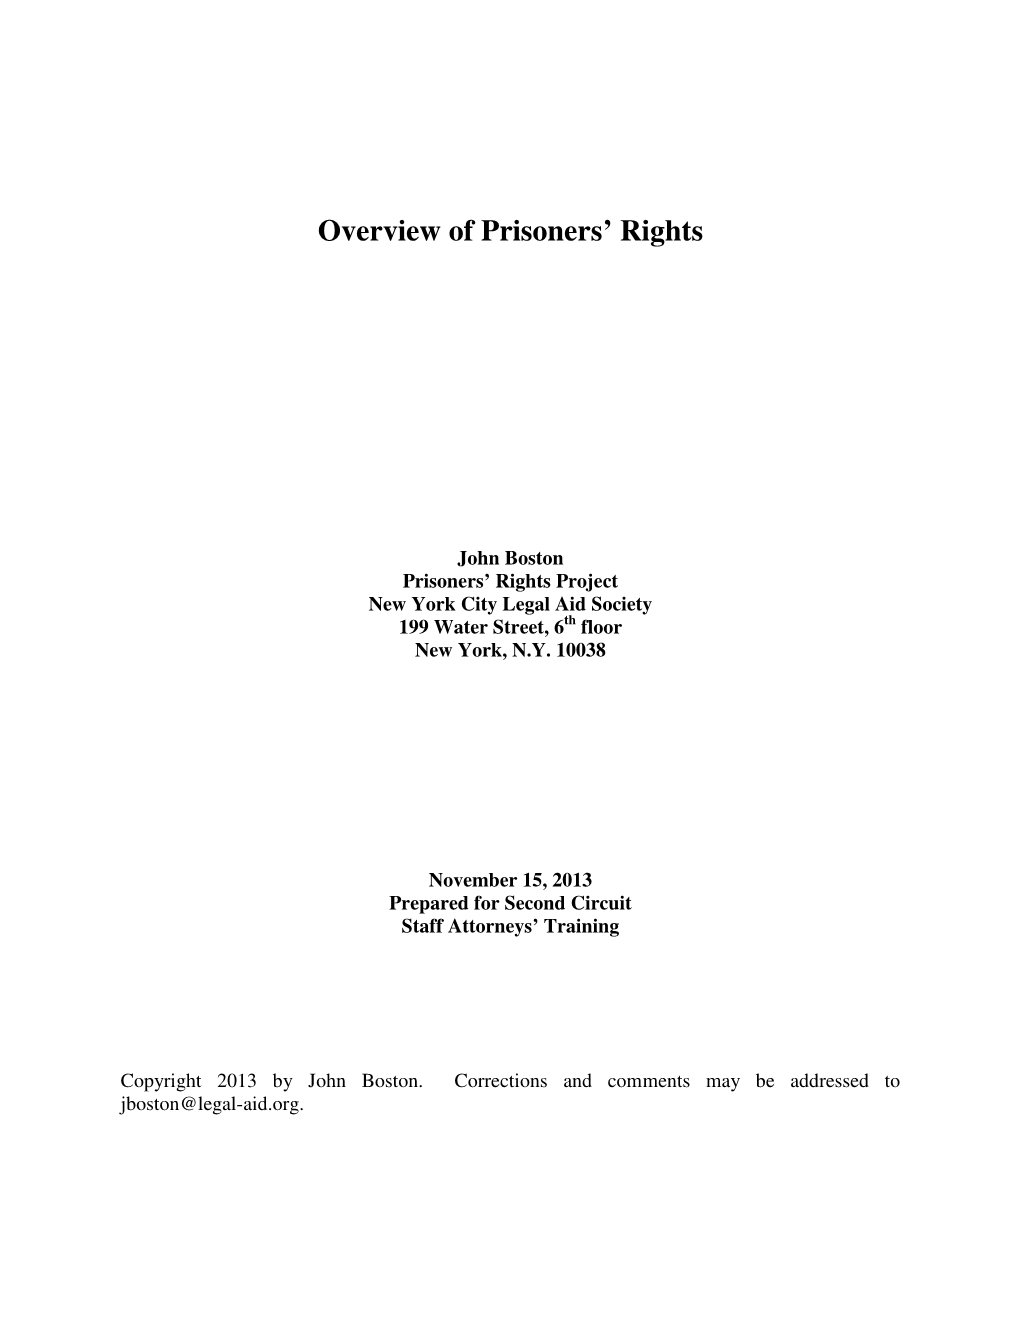 Overview of Prisoners' Rights